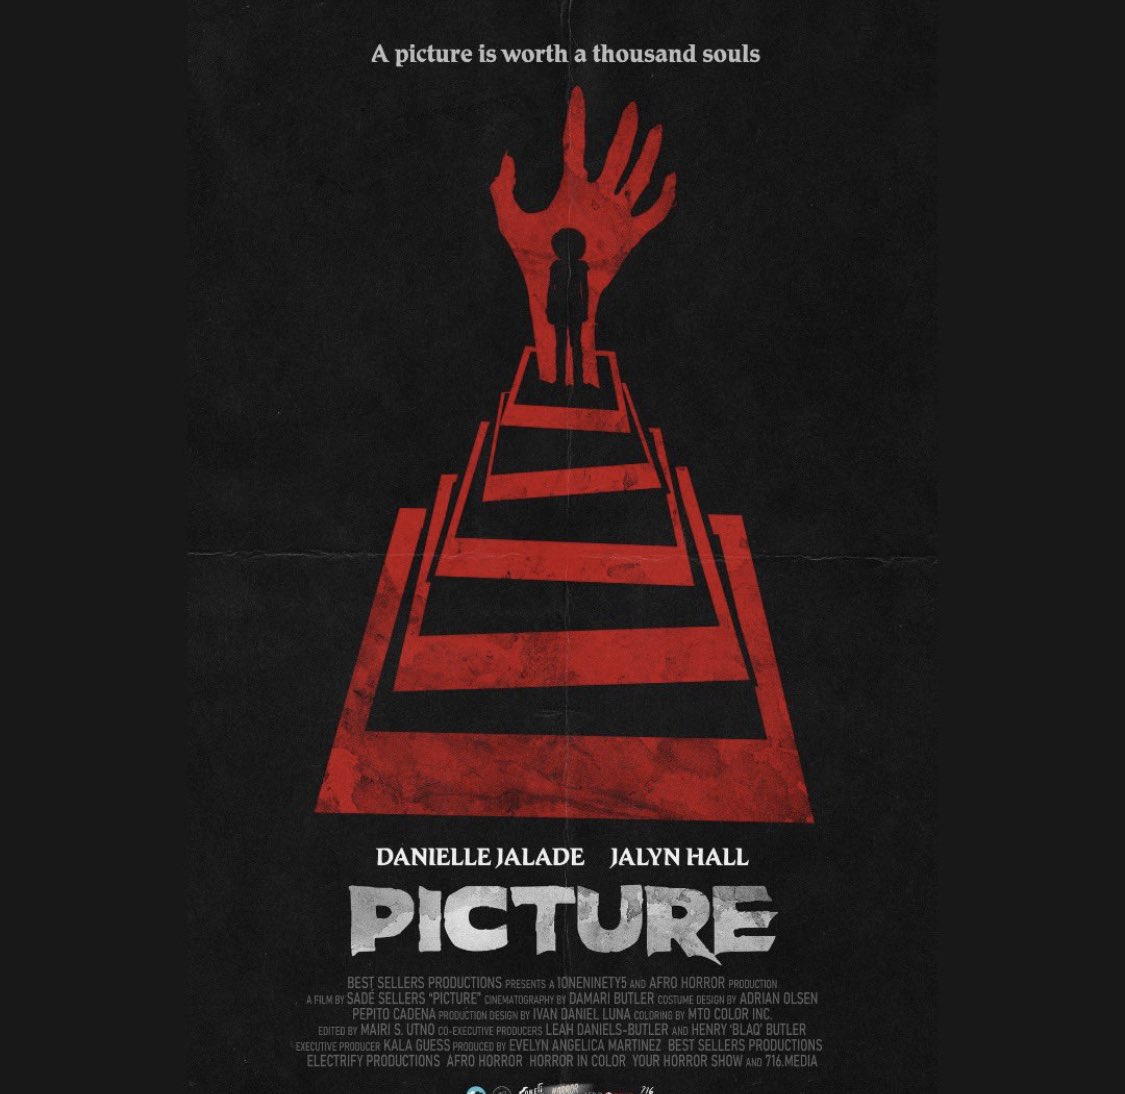 @IAMSadeSellers shot her latest horror short PICTURE starring Danielle Jalade(Black Widow, Saturdays) and Jalyn Hall (All American, Till) last October and they are near completion! Congrats Sade! Check out her Instagram @pictureshortfilm.